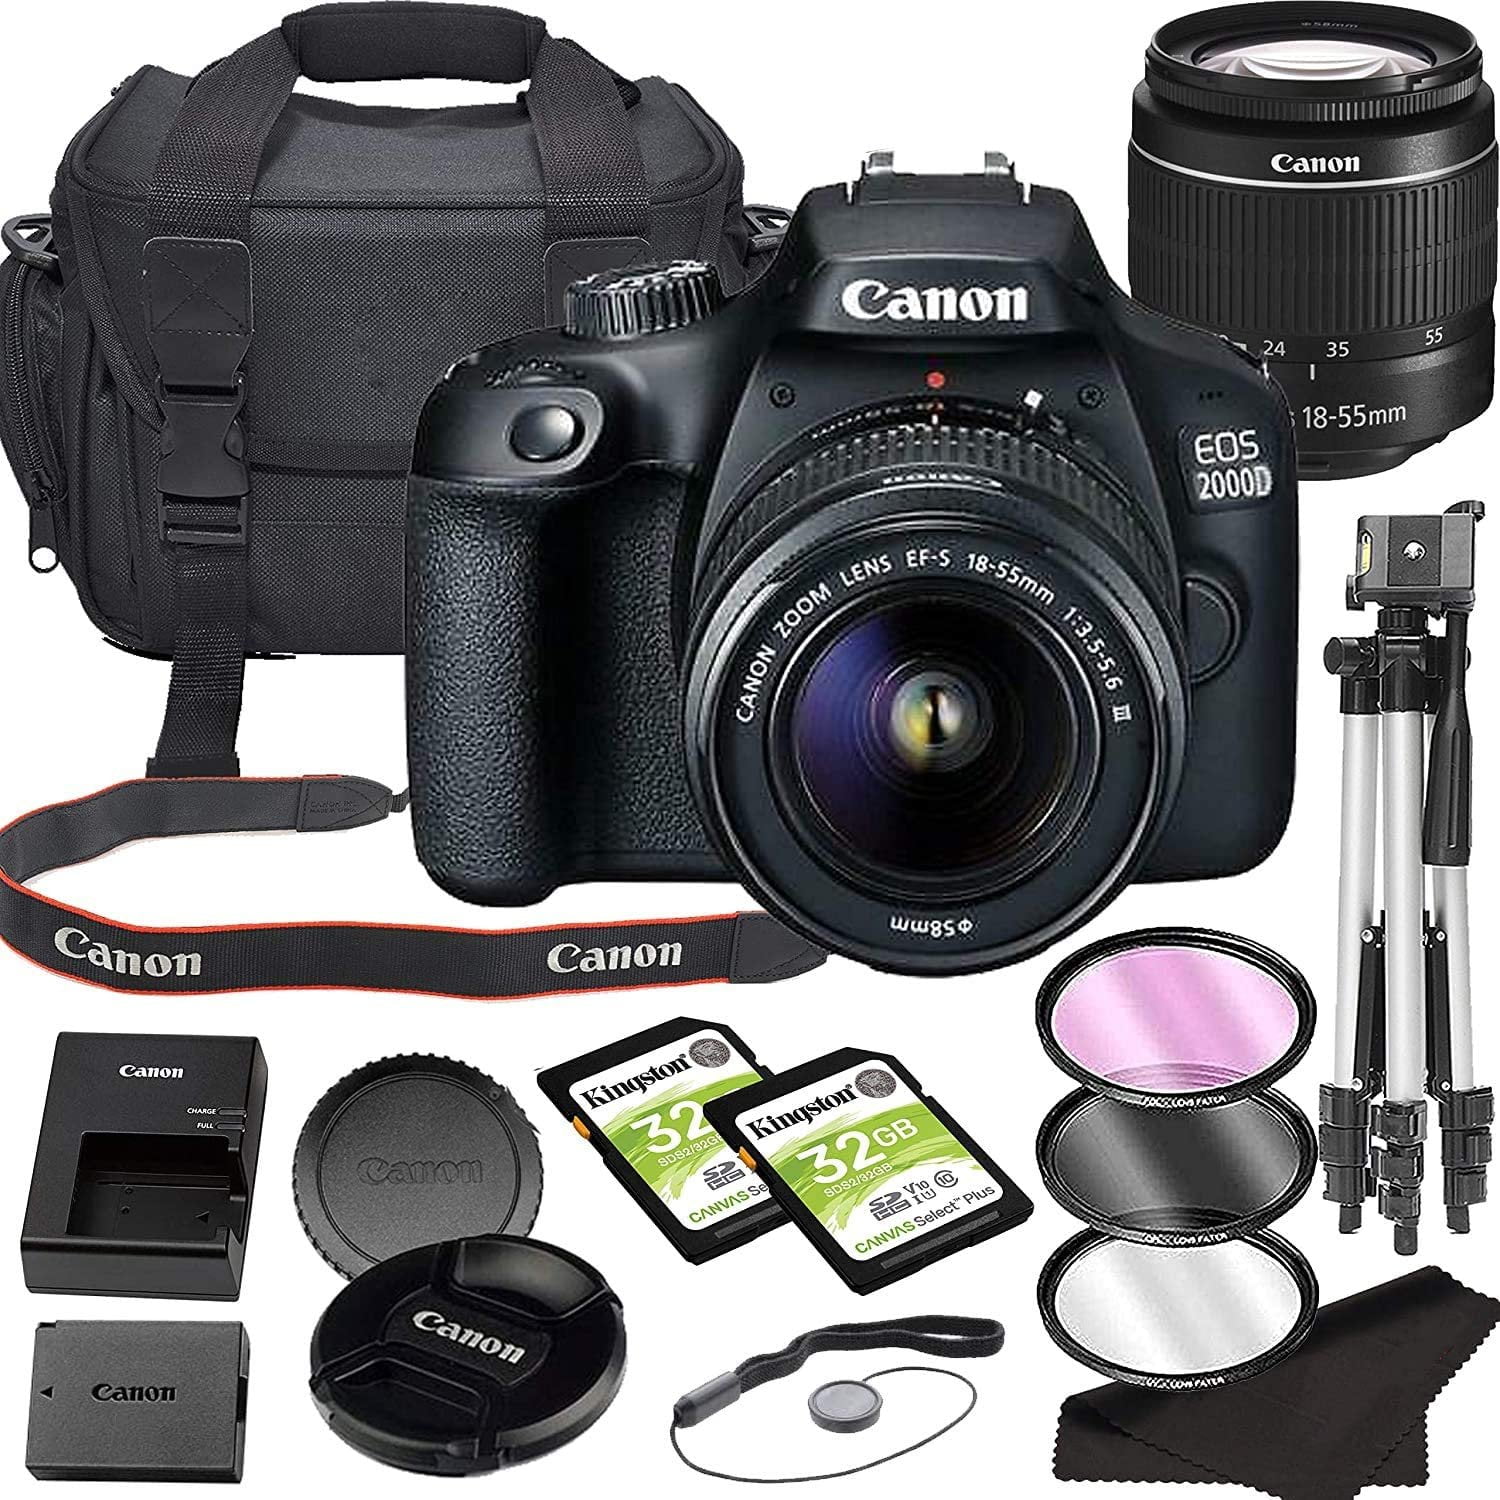 Canon EOS 2000D (Rebel T7) DSLR 24.1MP Camera with 18-55mm Lens with  Built-in Wi-Fi, 24.1 MP CMOS Sensor